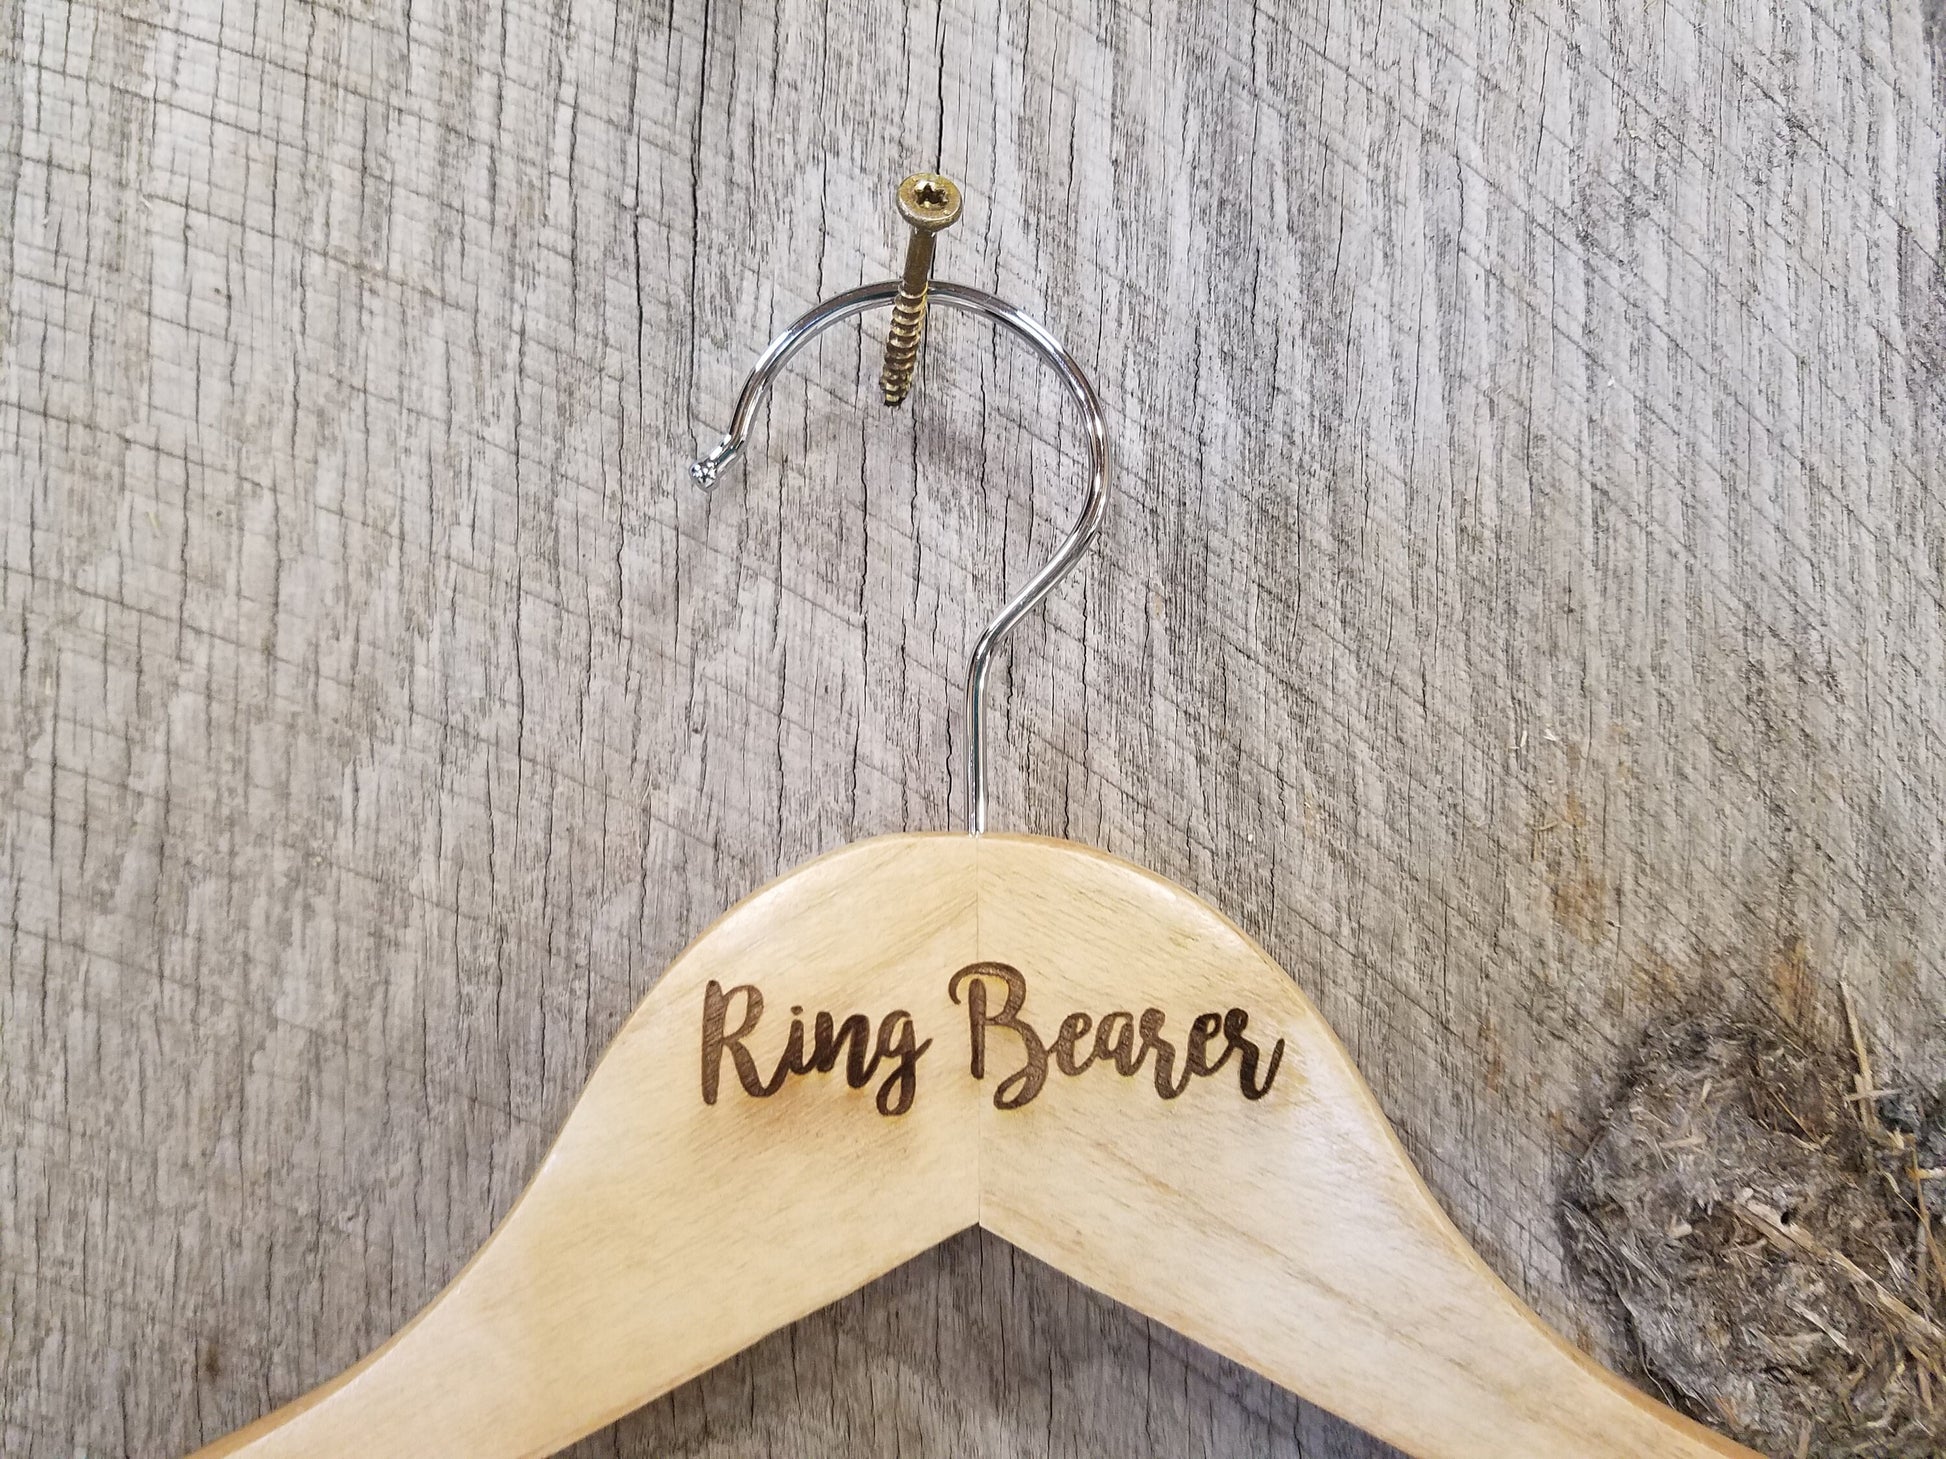 Ring Bearer Suit Clothes Hanger Bridal Party Engraved Hard Wood Coat Sturdy Wedding Bromellow Personalized